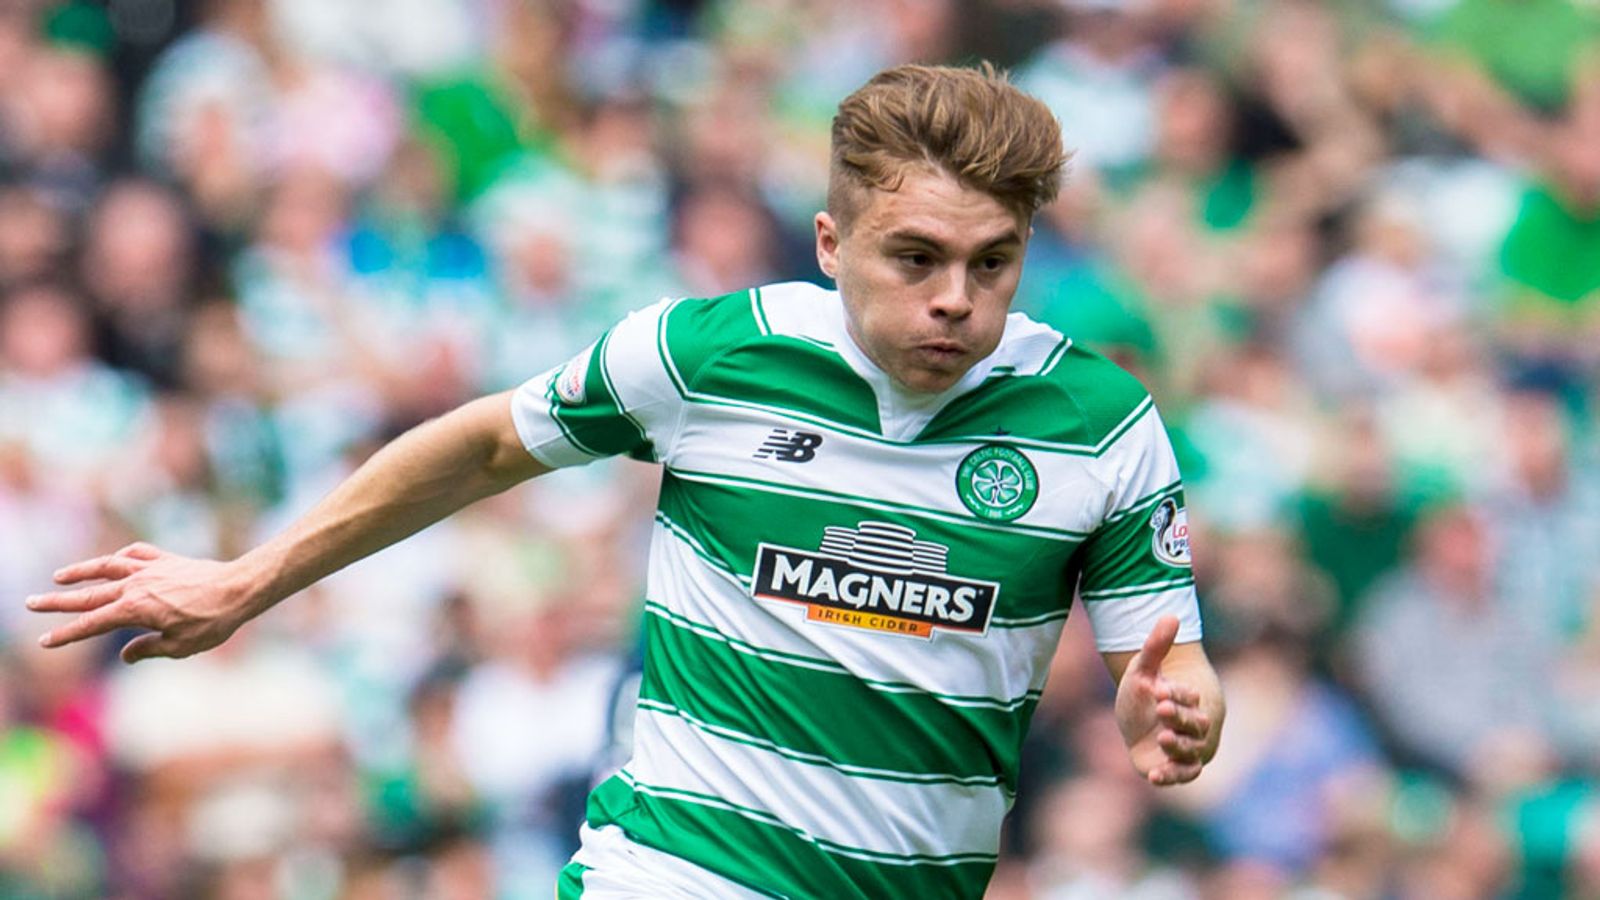 Live match preview - Celtic vs Dundee U 25.10.2015